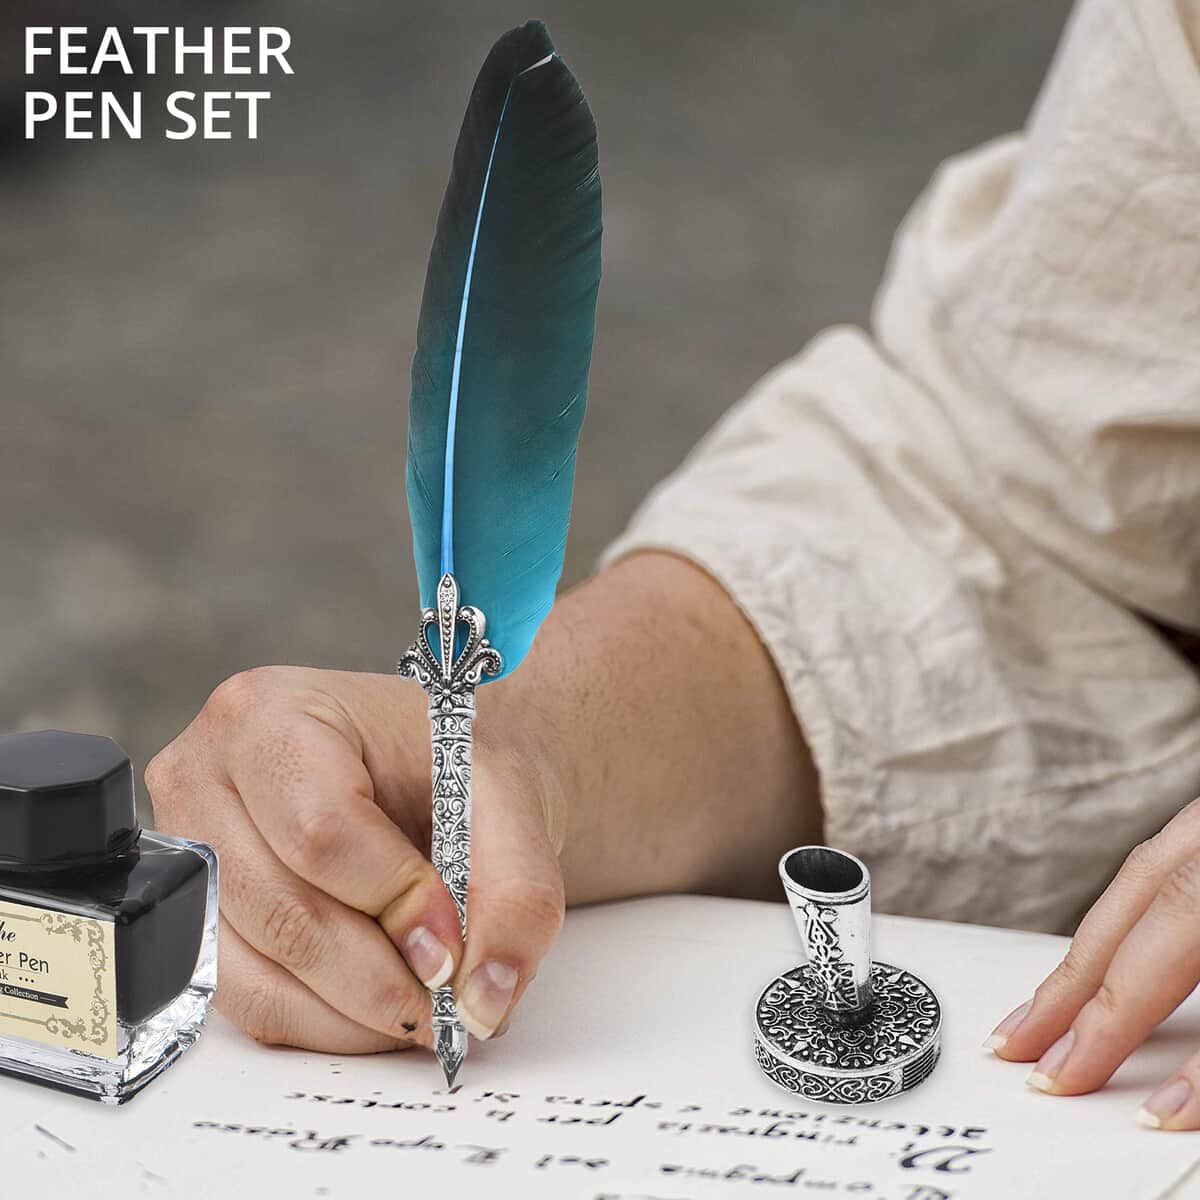 Brown Antique Pen Set: Includeed Feather Pen, Pen Holder, 5 Extra Nibs and 15ml Black Ink Bottle image number 1